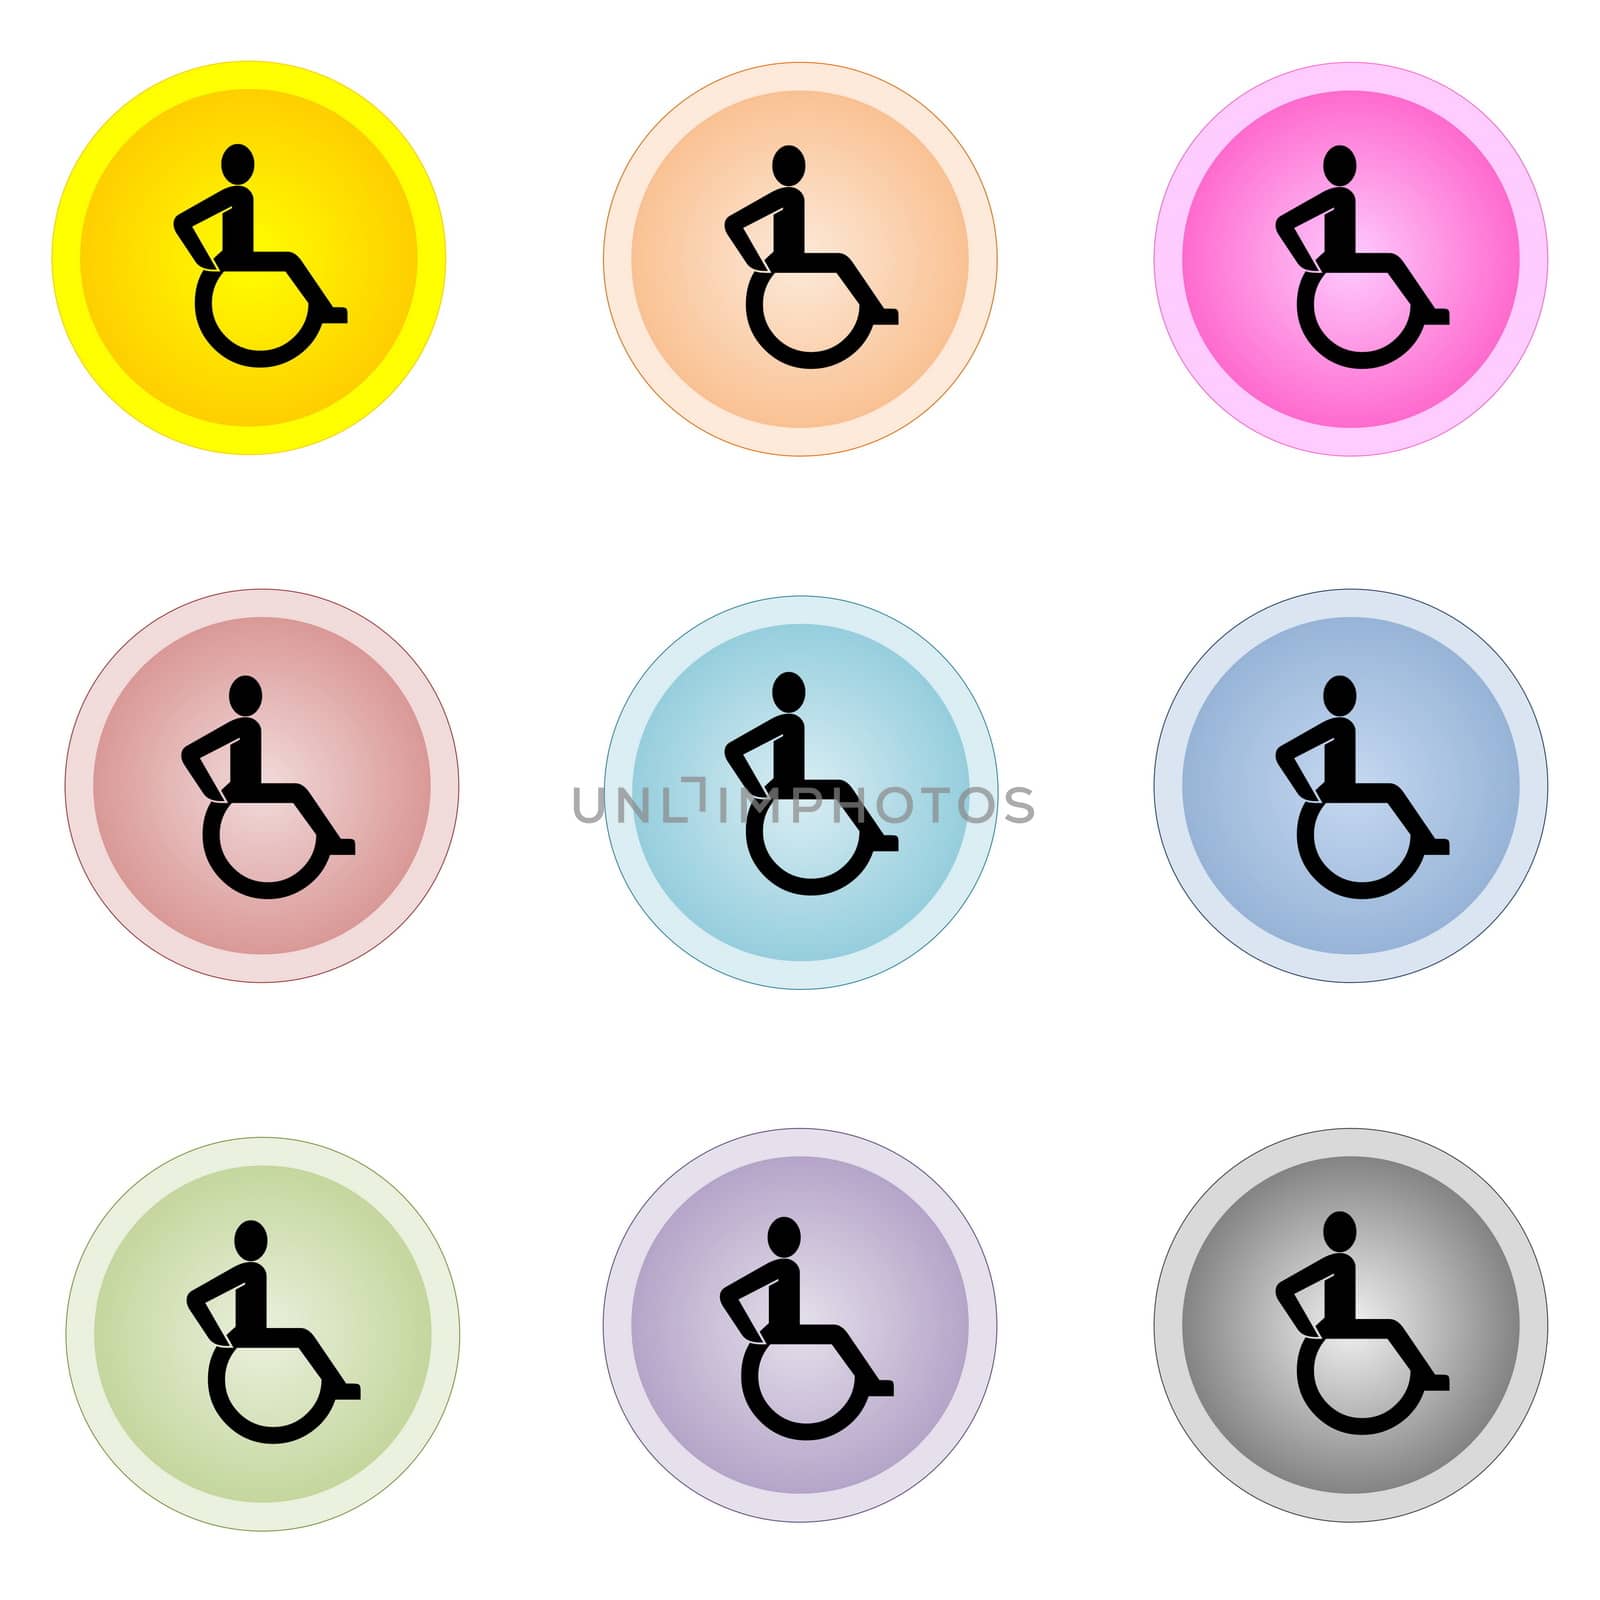 Set of colorful buttons with handicap, disable sign by Elenaphotos21